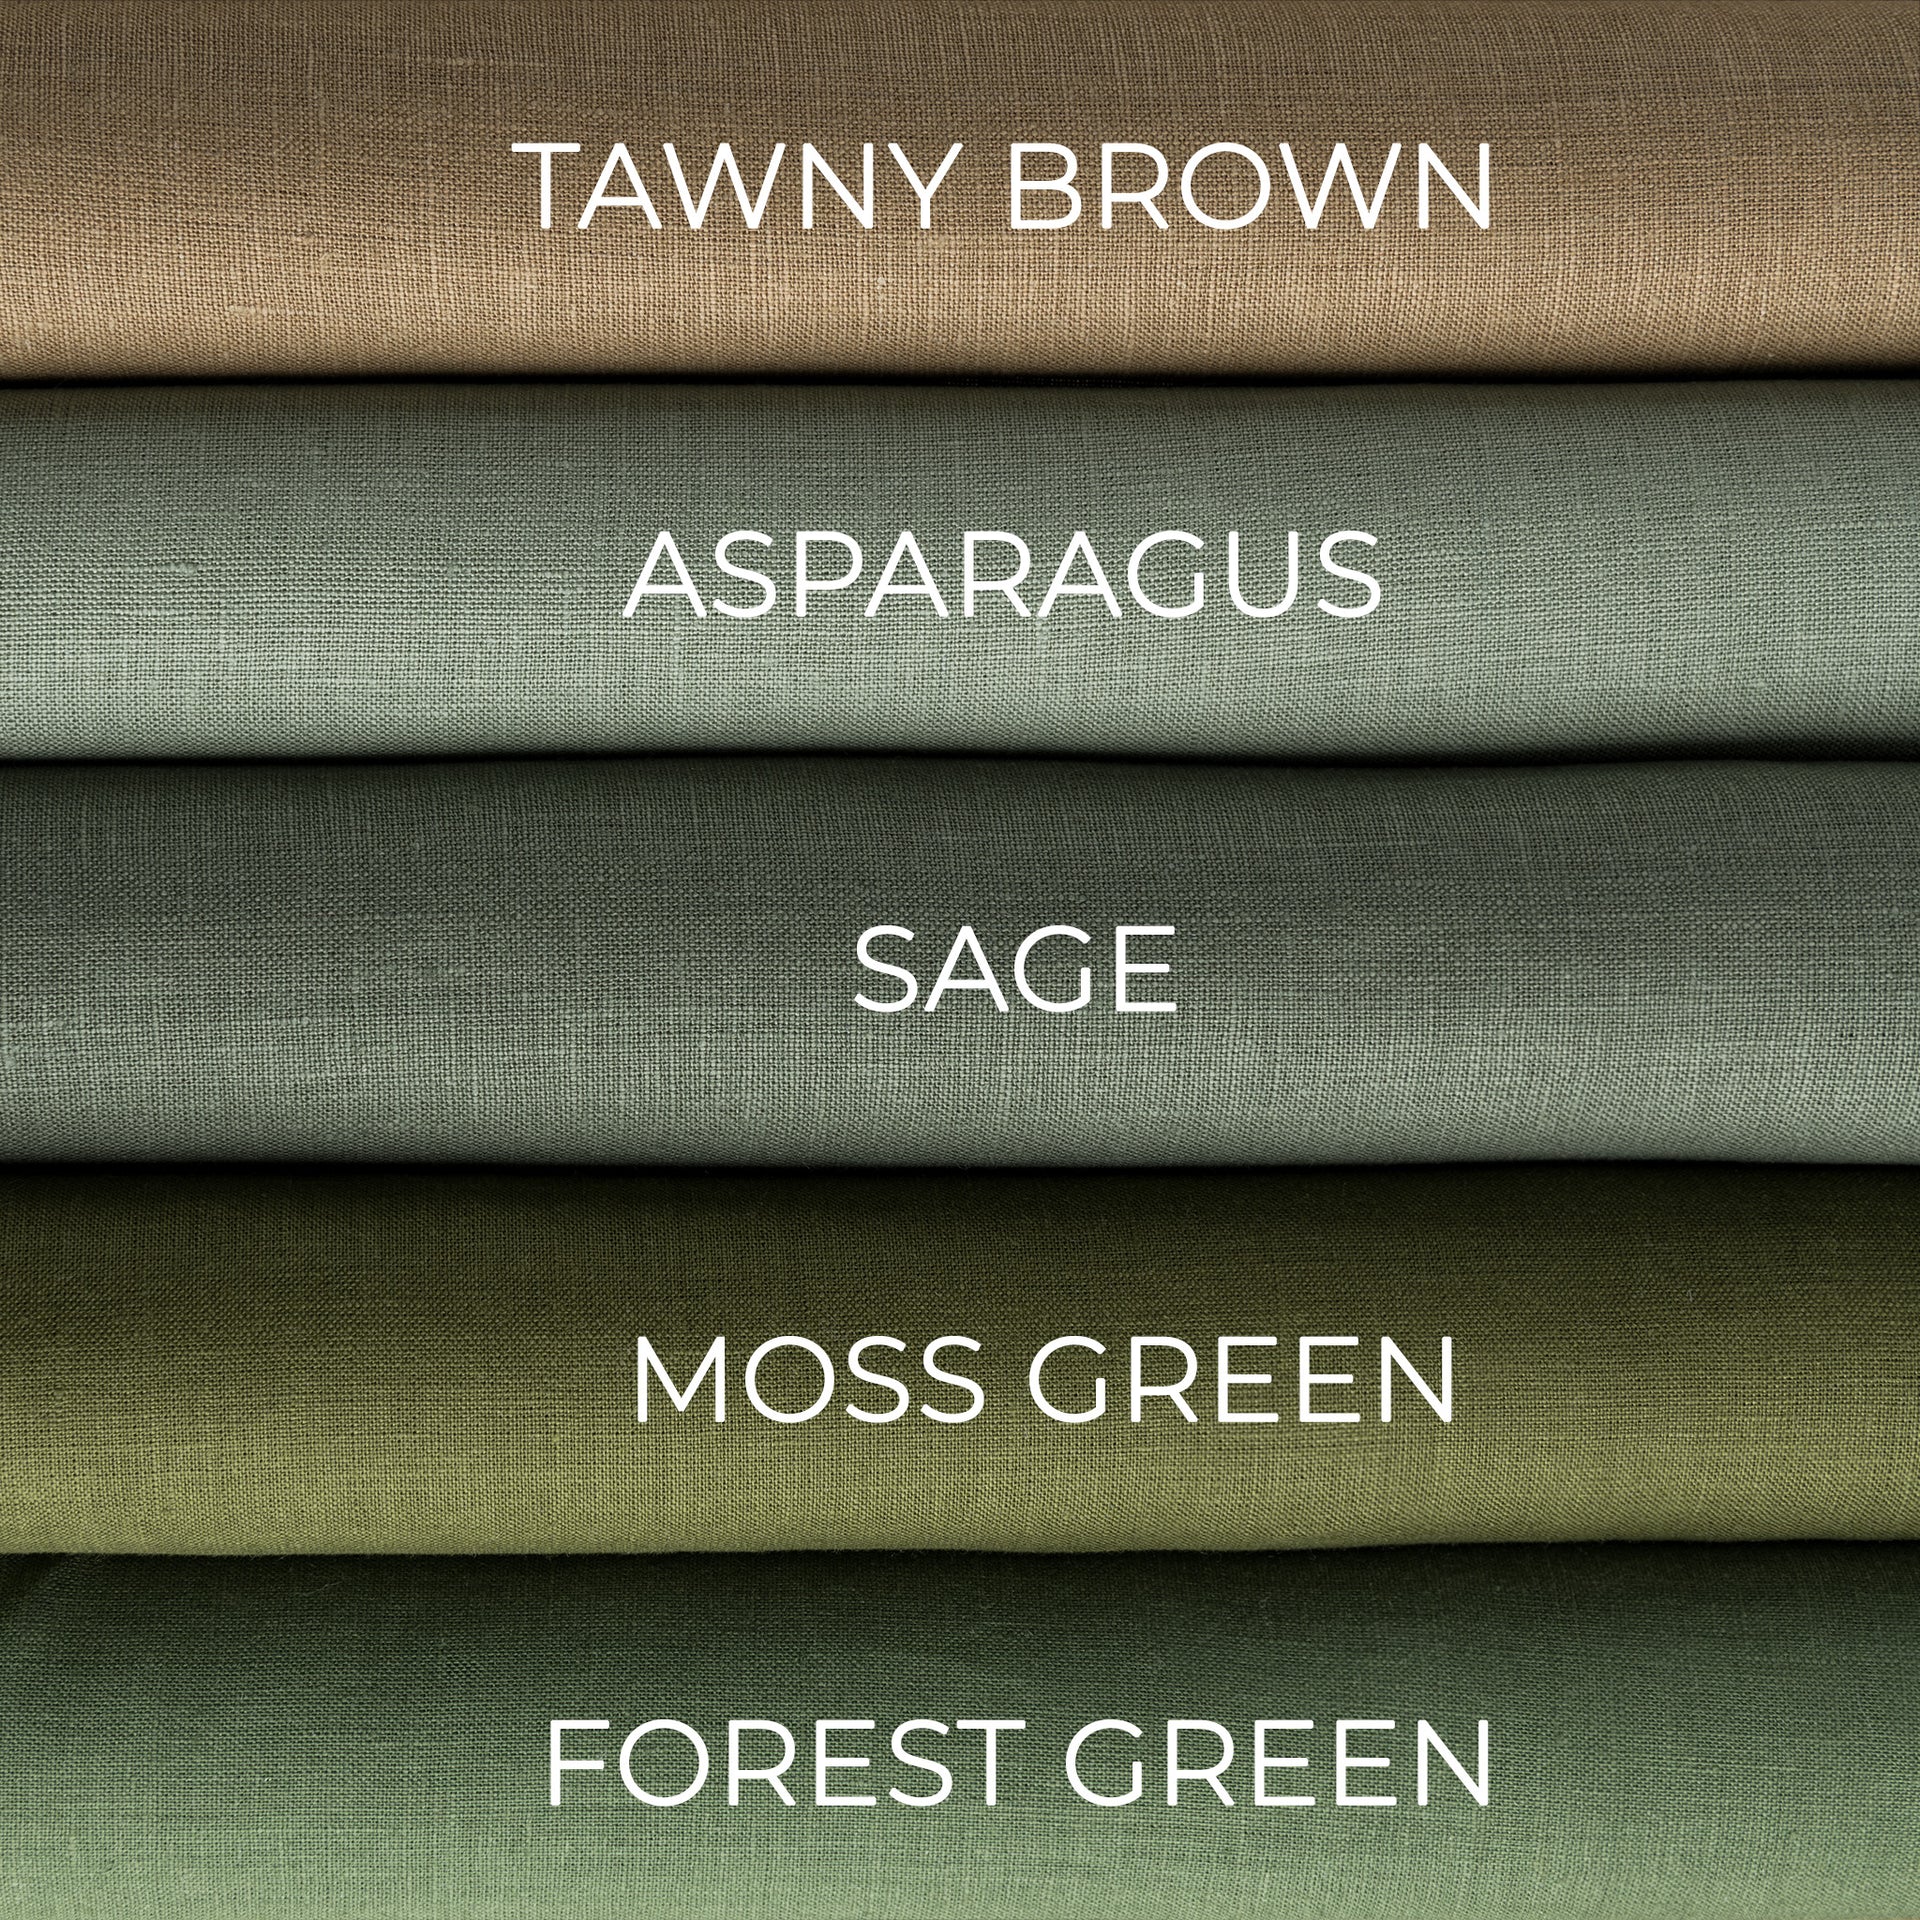 @color:Tawny Brown,color:Asparagus, color:Forest Green, color:Sage, color: Moss Green